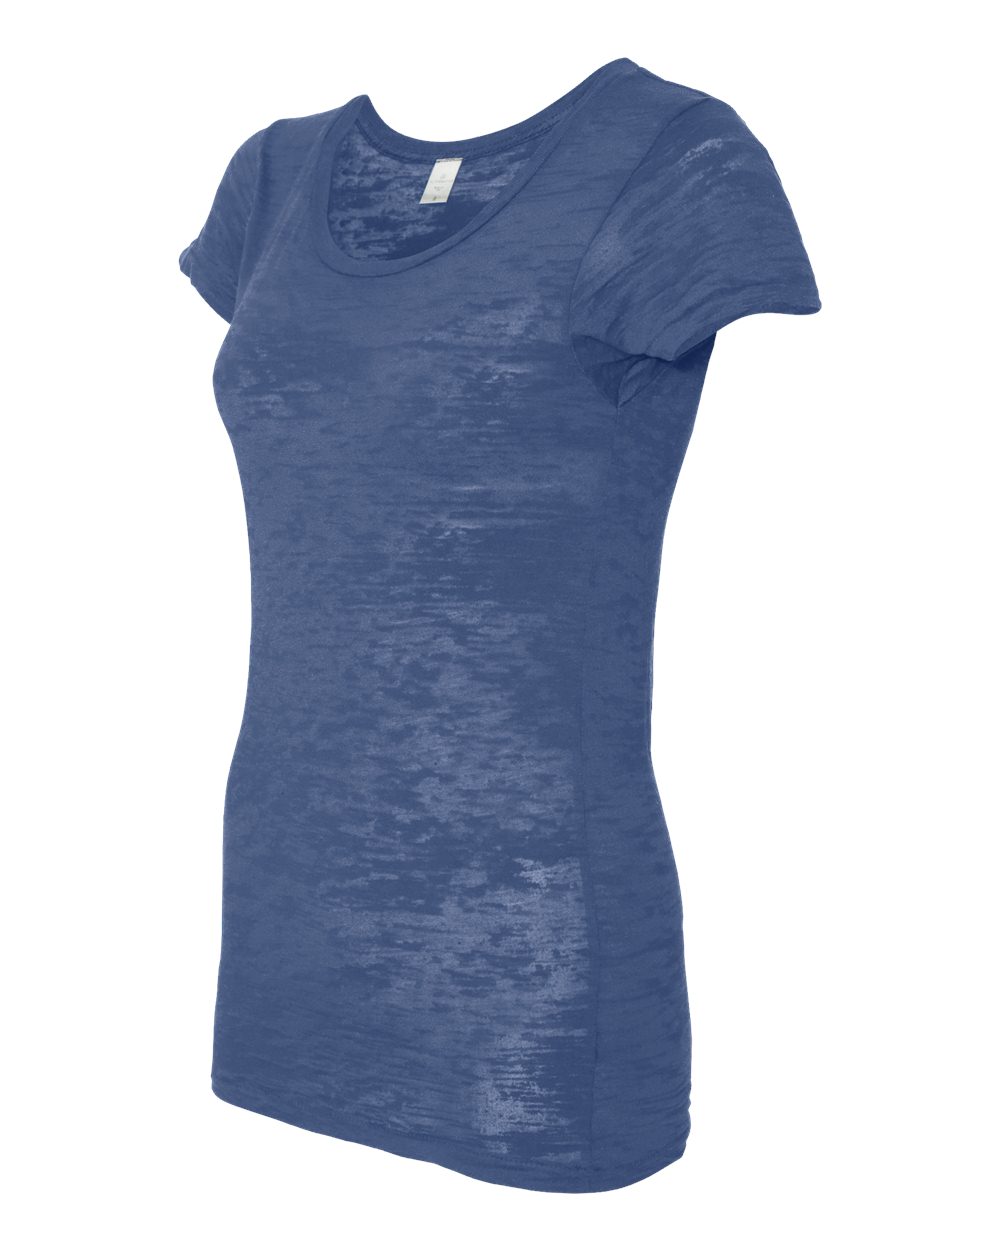 Burnout T-Shirt in STEELY BLUE S23-R